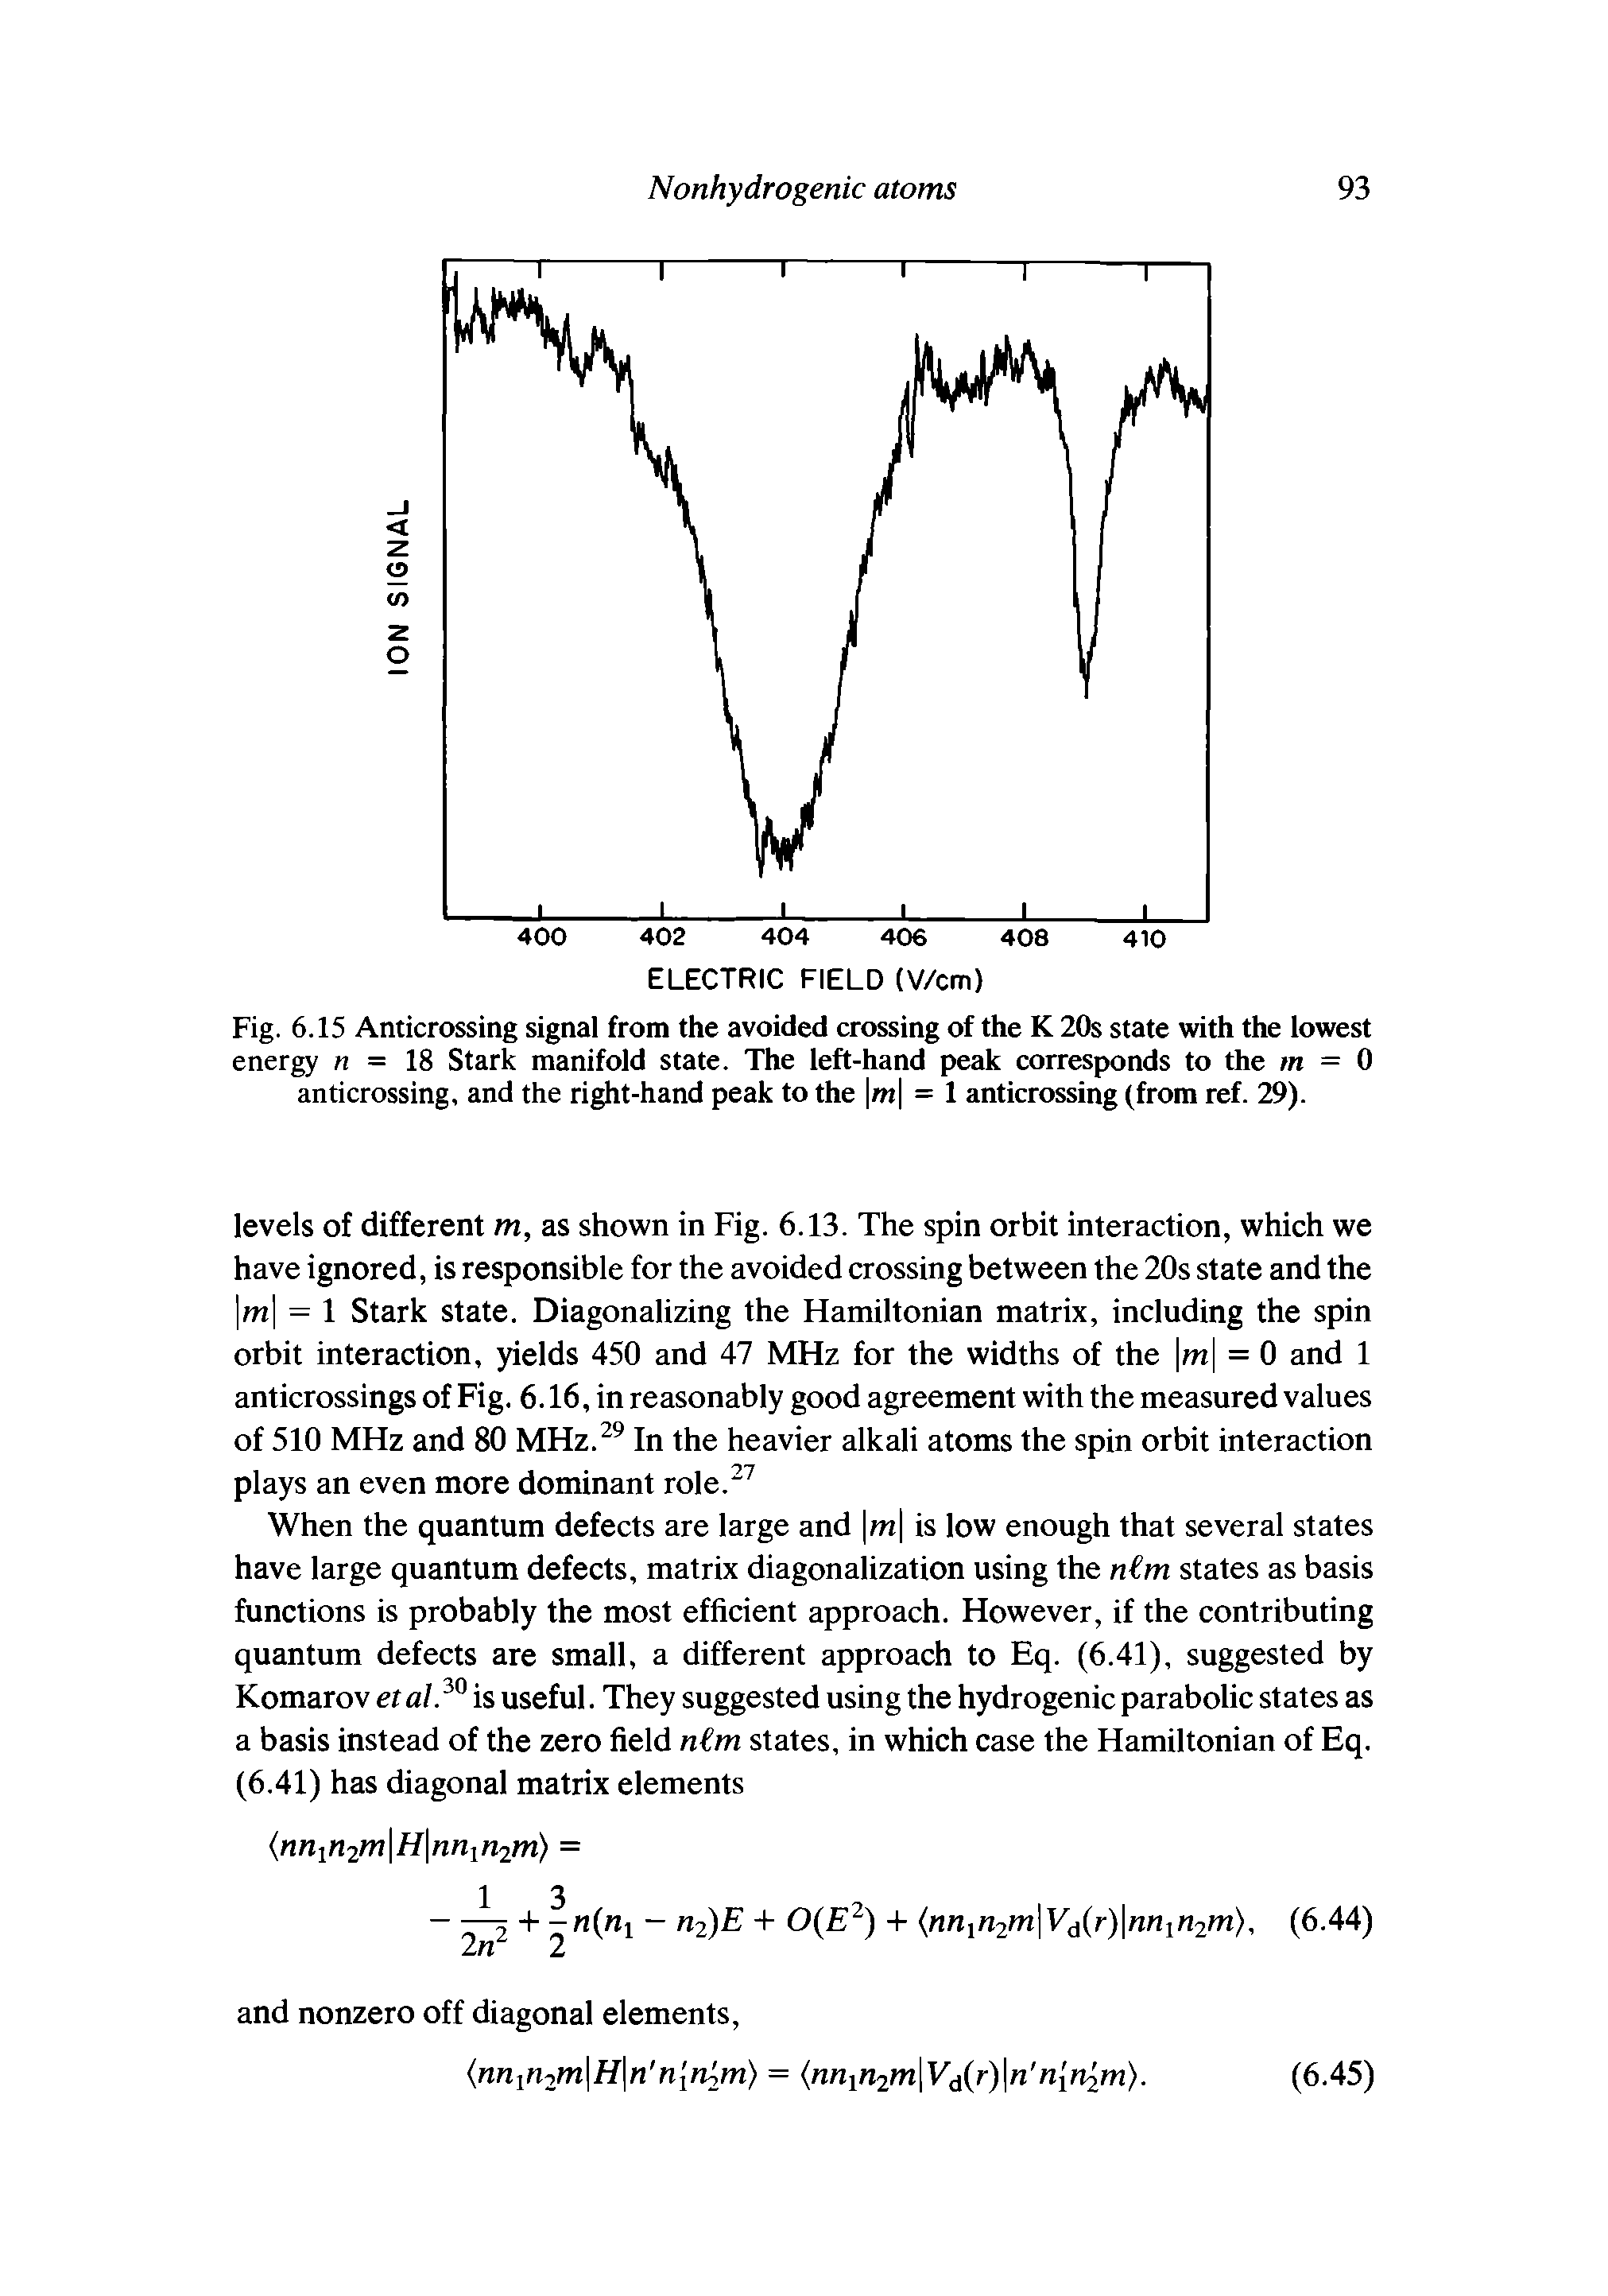 Fig. 6.15 Anticrossing signal from the avoided crossing of the K 20s state with the lowest energy n = 18 Stark manifold state. The left-hand peak corresponds to the m = 0 anticrossing, and the right-hand peak to the m = 1 anticrossing (from ref. 29).